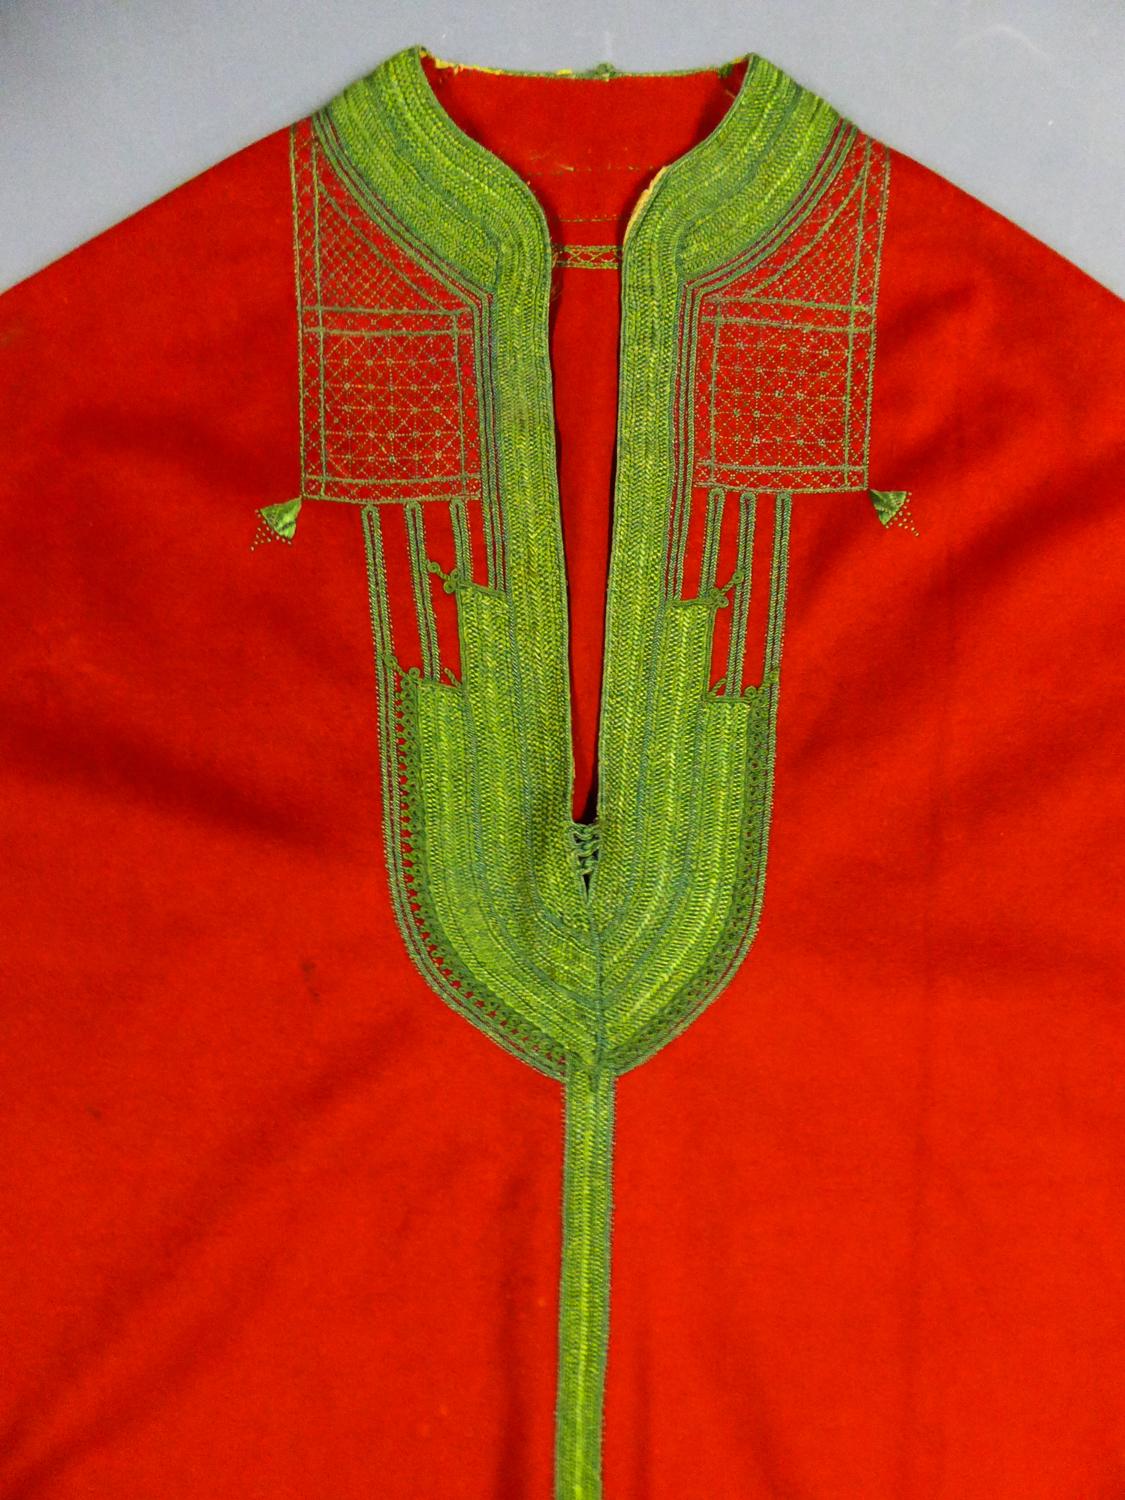 A Ceremonial Jebba Tunic in Felt Embroidered with Silk - Tunisia Circa 1900/1950 For Sale 7